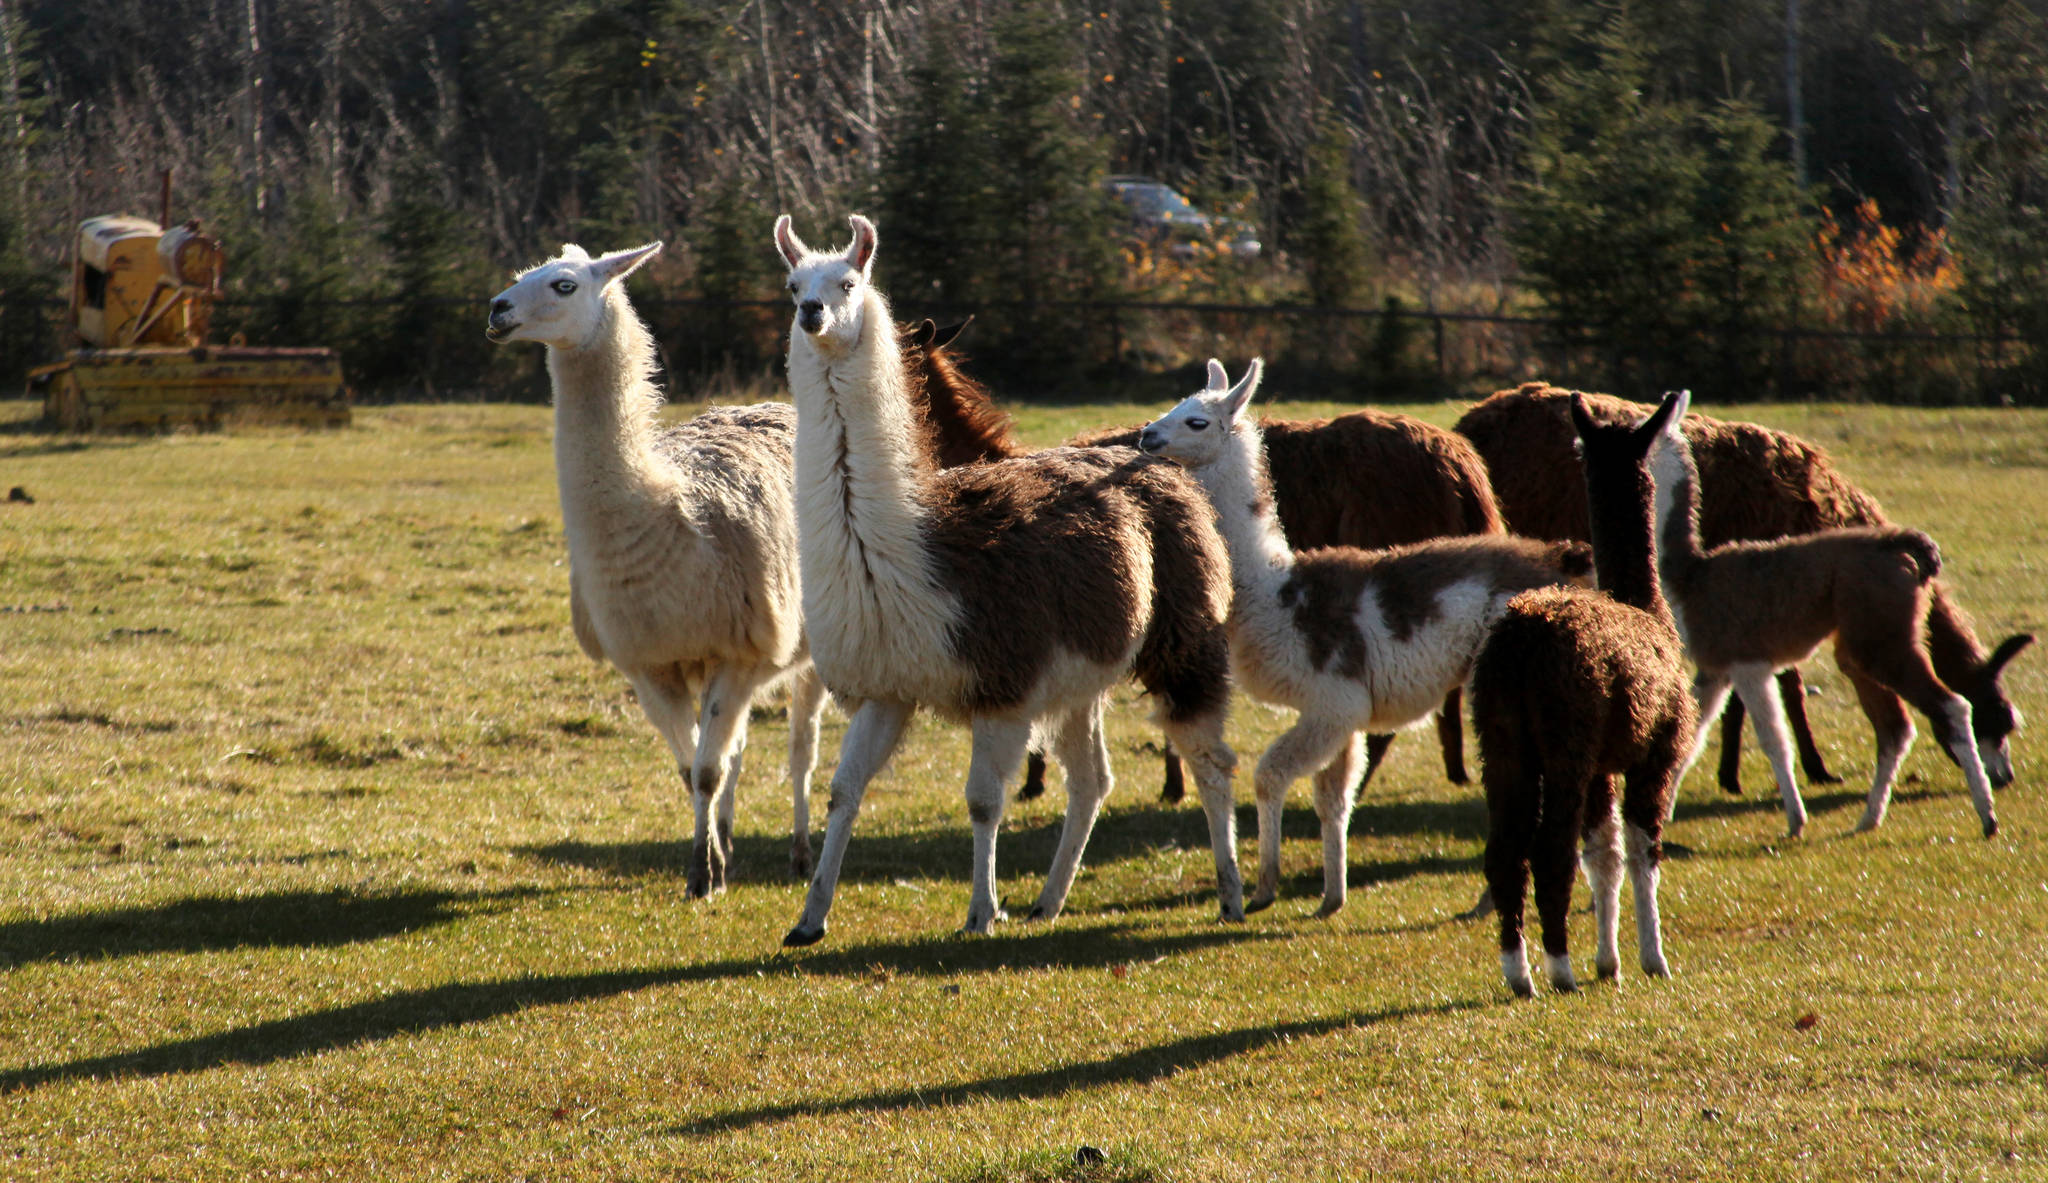 Llamas graze in the pasture of Diamond M Ranch Resort on Tuesday near Kenai. Three calves were born this summer to the herd that Diamond M owners Ronna and Blair Martin have kept since the 1990s. Though members of the Martin family have made yarn and felt hats from llama wool, taken them as pack animals on camping trips, and occassionally harvested one for meat, the llamas are mostly “exotic lawn ornaments,” Ronna Martin said. (Photos by Ben Boettger/Peninsula Clarion)